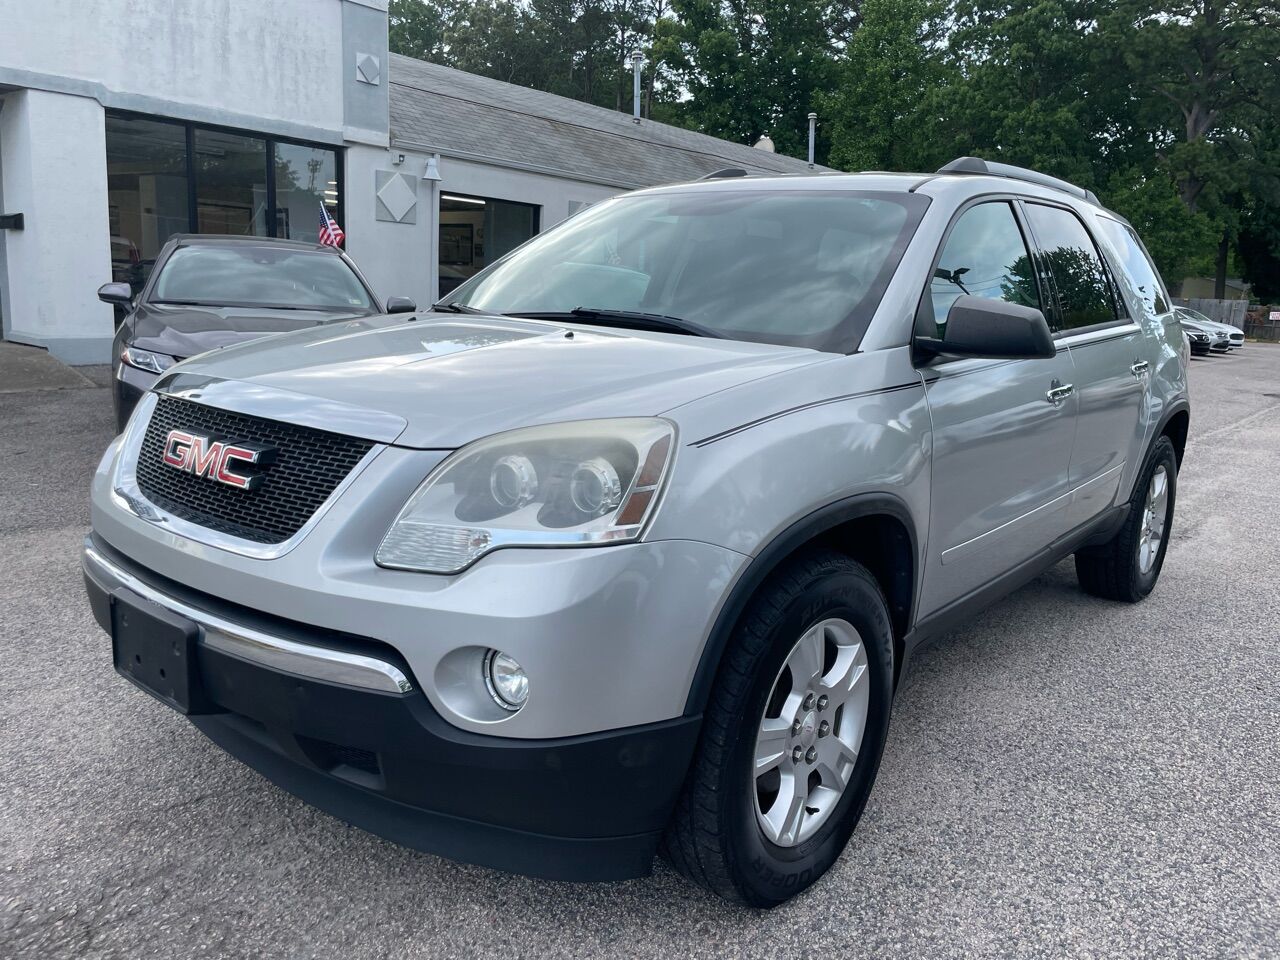 2012 GMC Acadia For Sale - Page 2